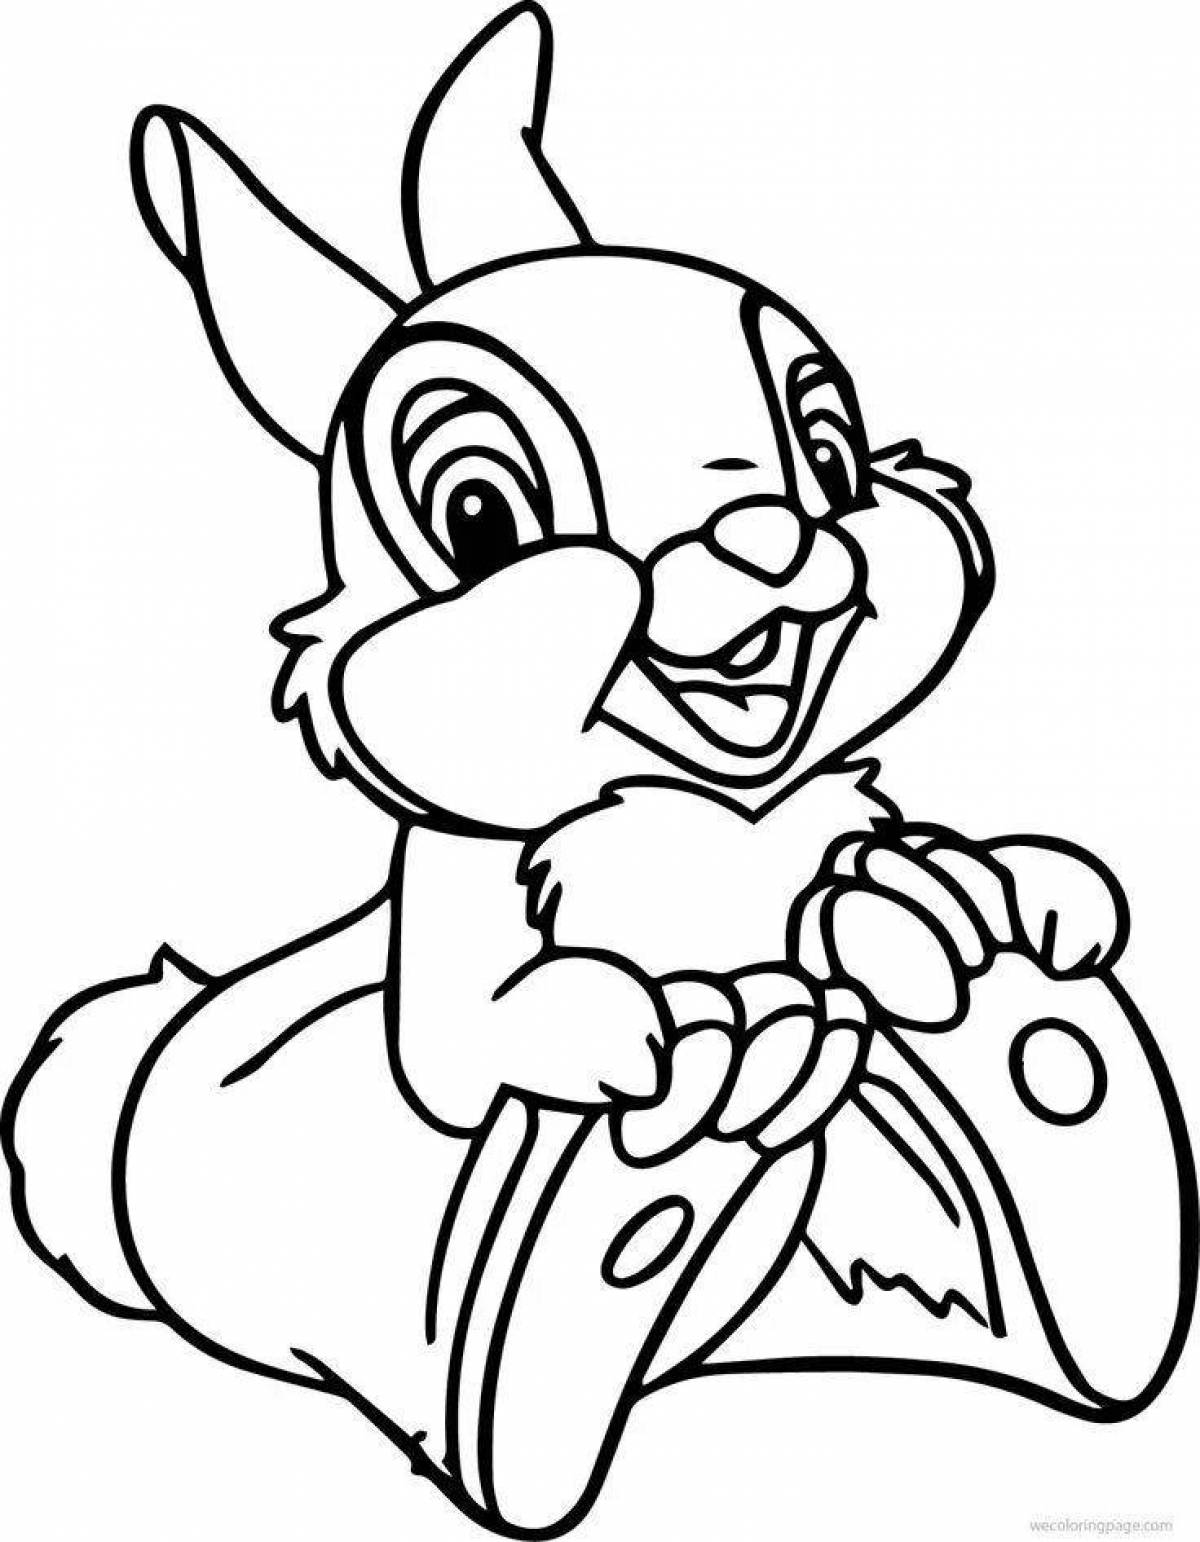 Fascinating coloring book year of the rabbit 2023